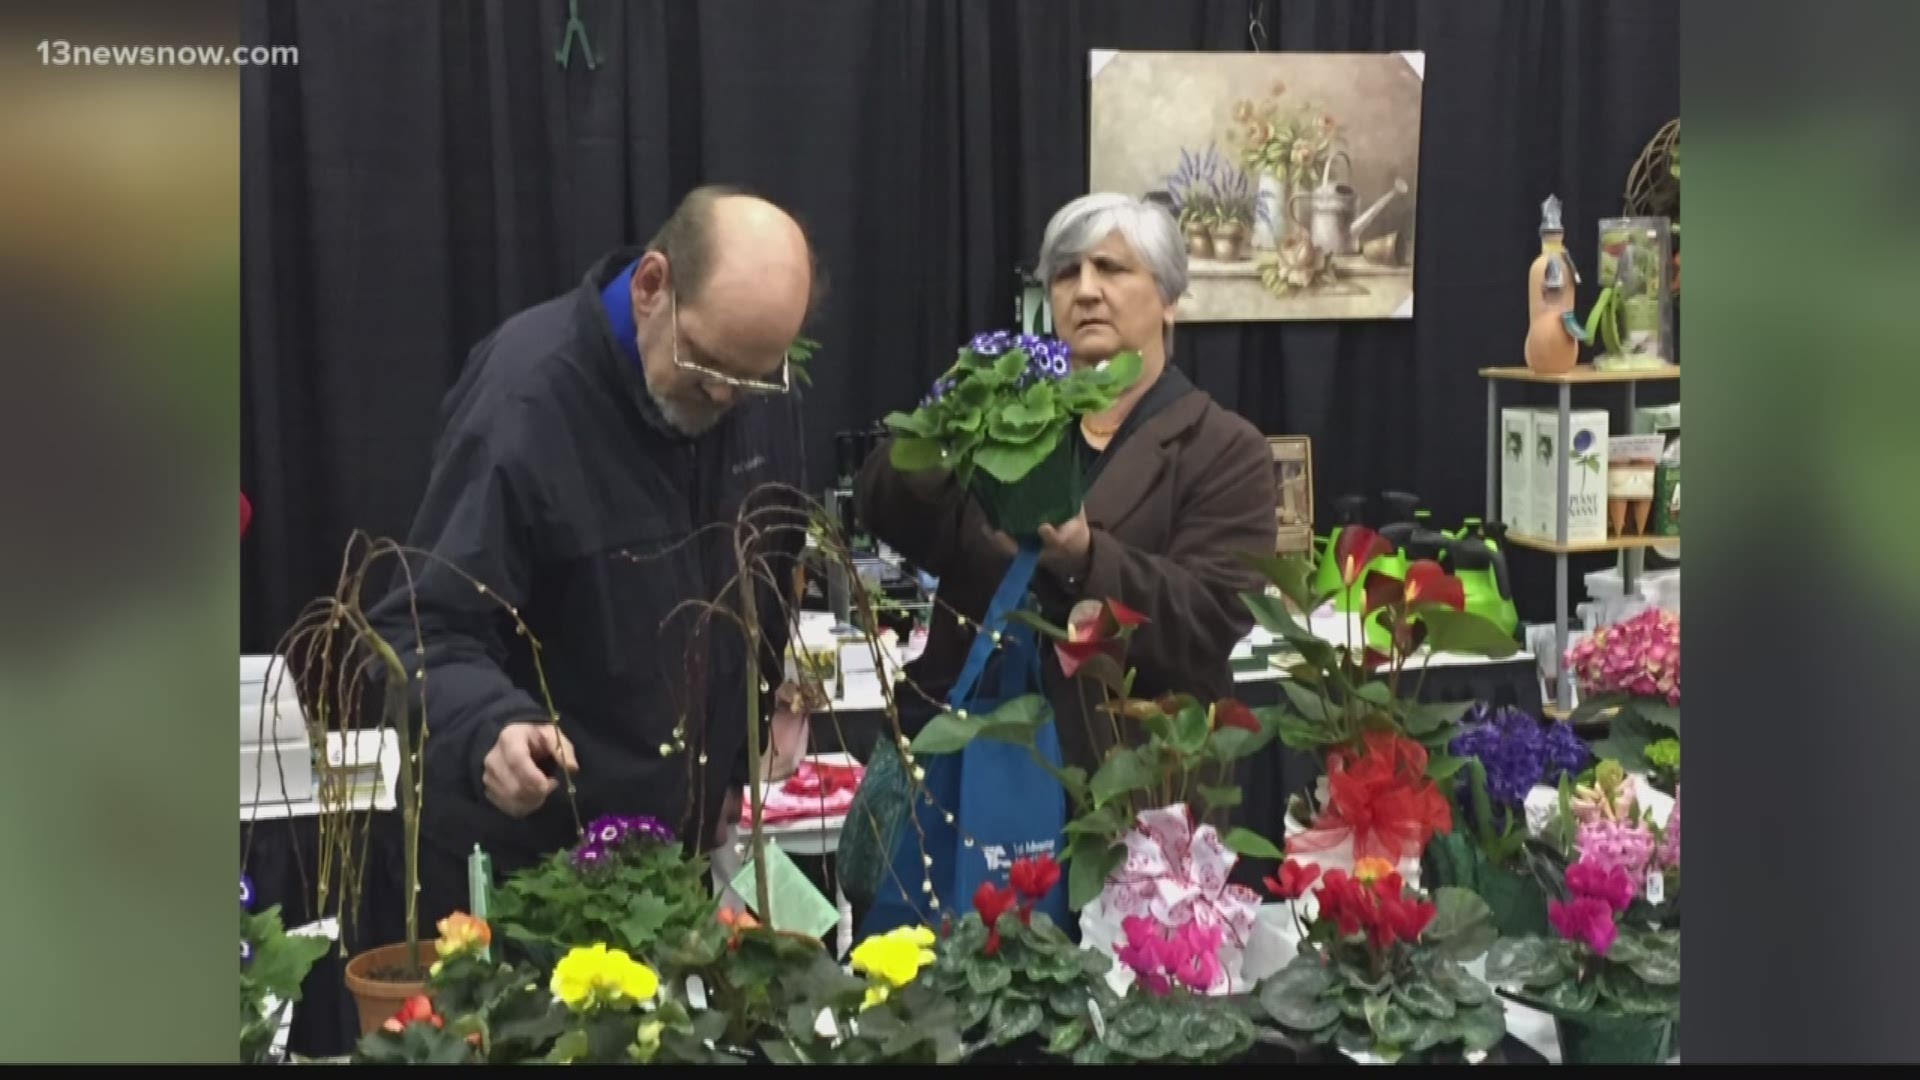 The Peninsula’s largest home show will take place on Feb. 9 and 10.